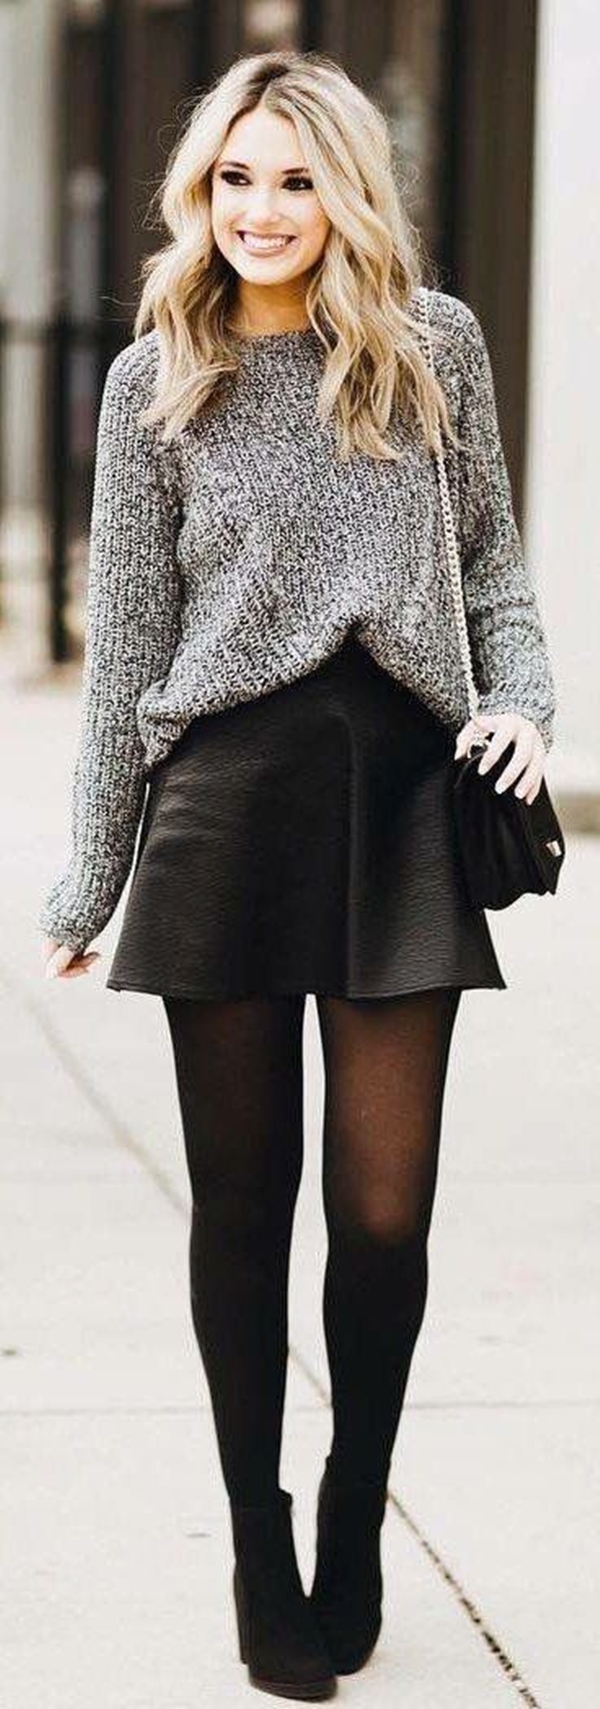 Ways-to-Wear-Crop-Top-Outfits-in-Winters